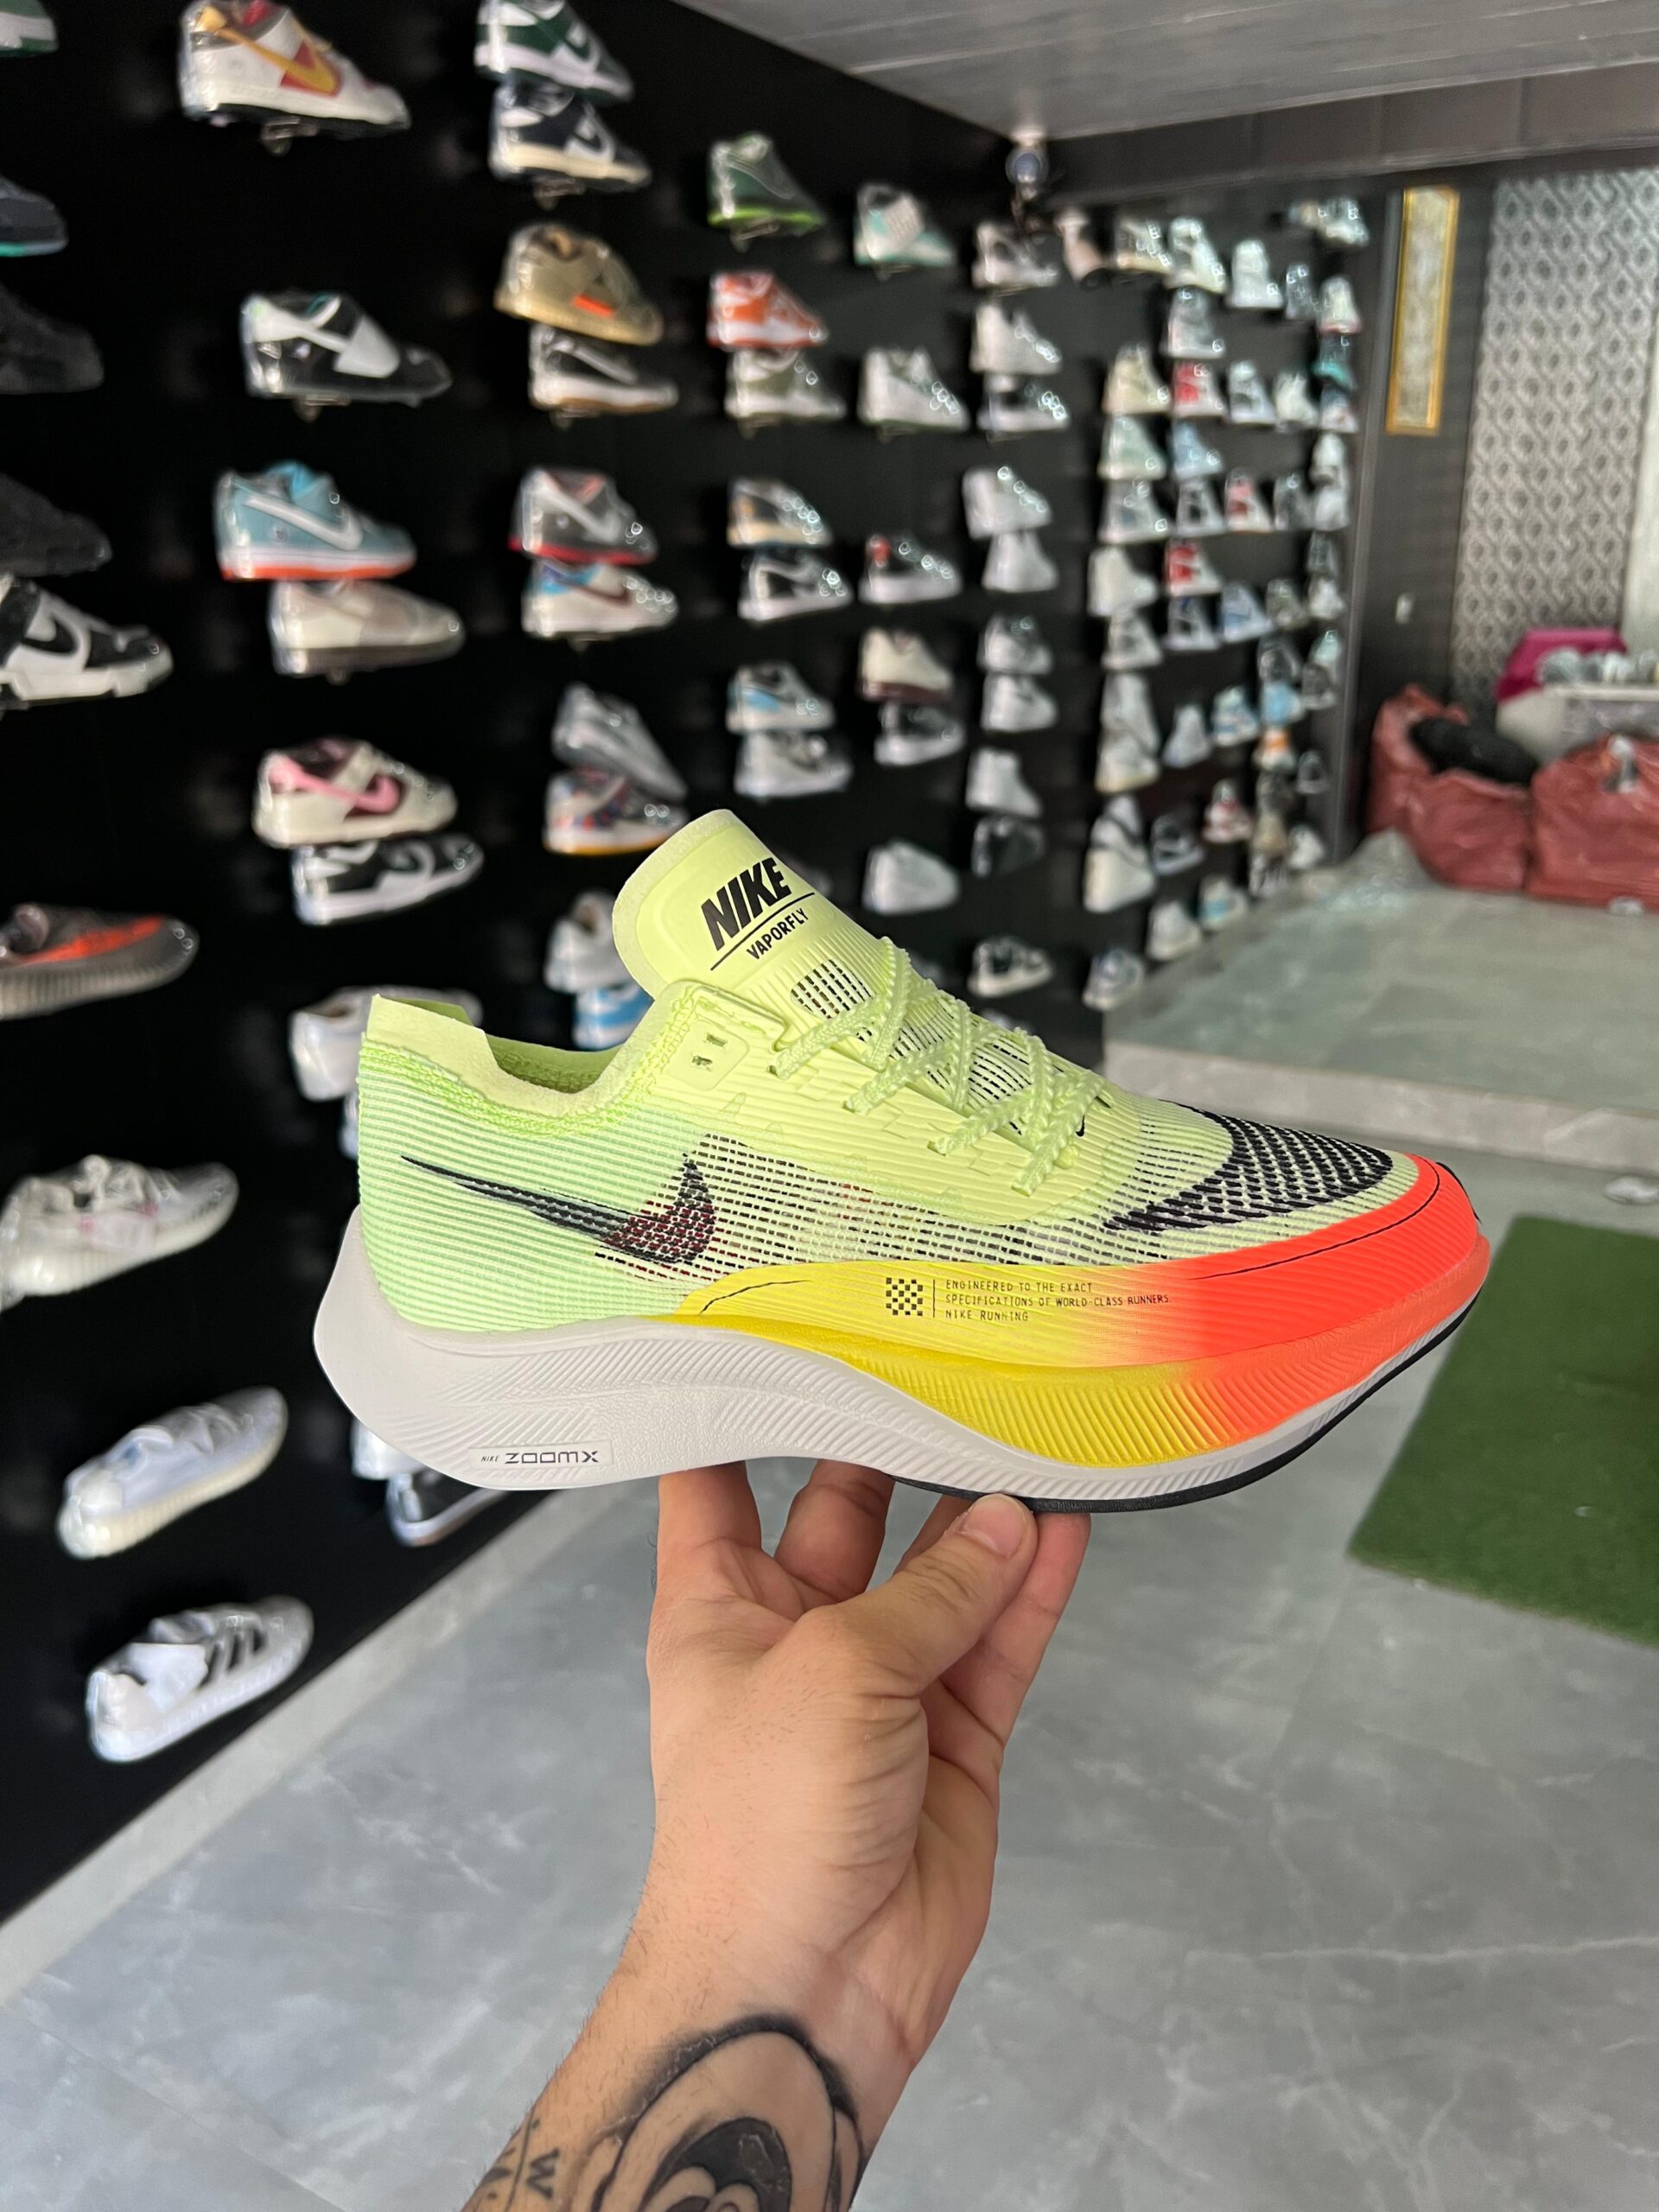 Vapourfly Next Zoom Sneakers 4 Colors